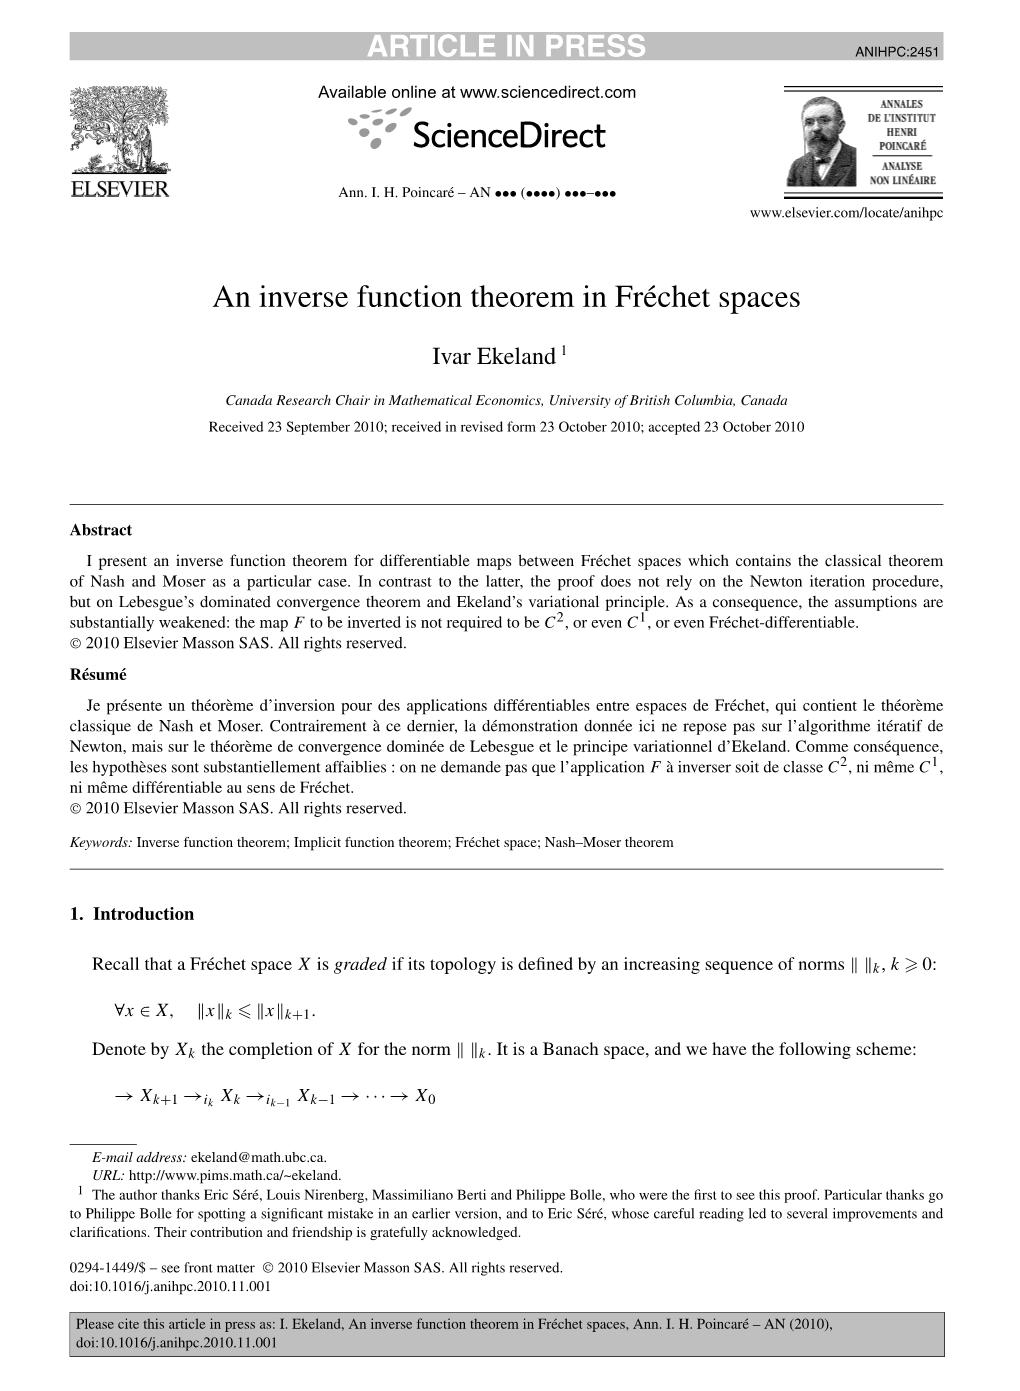 An Inverse Function Theorem in Fréchet Spaces